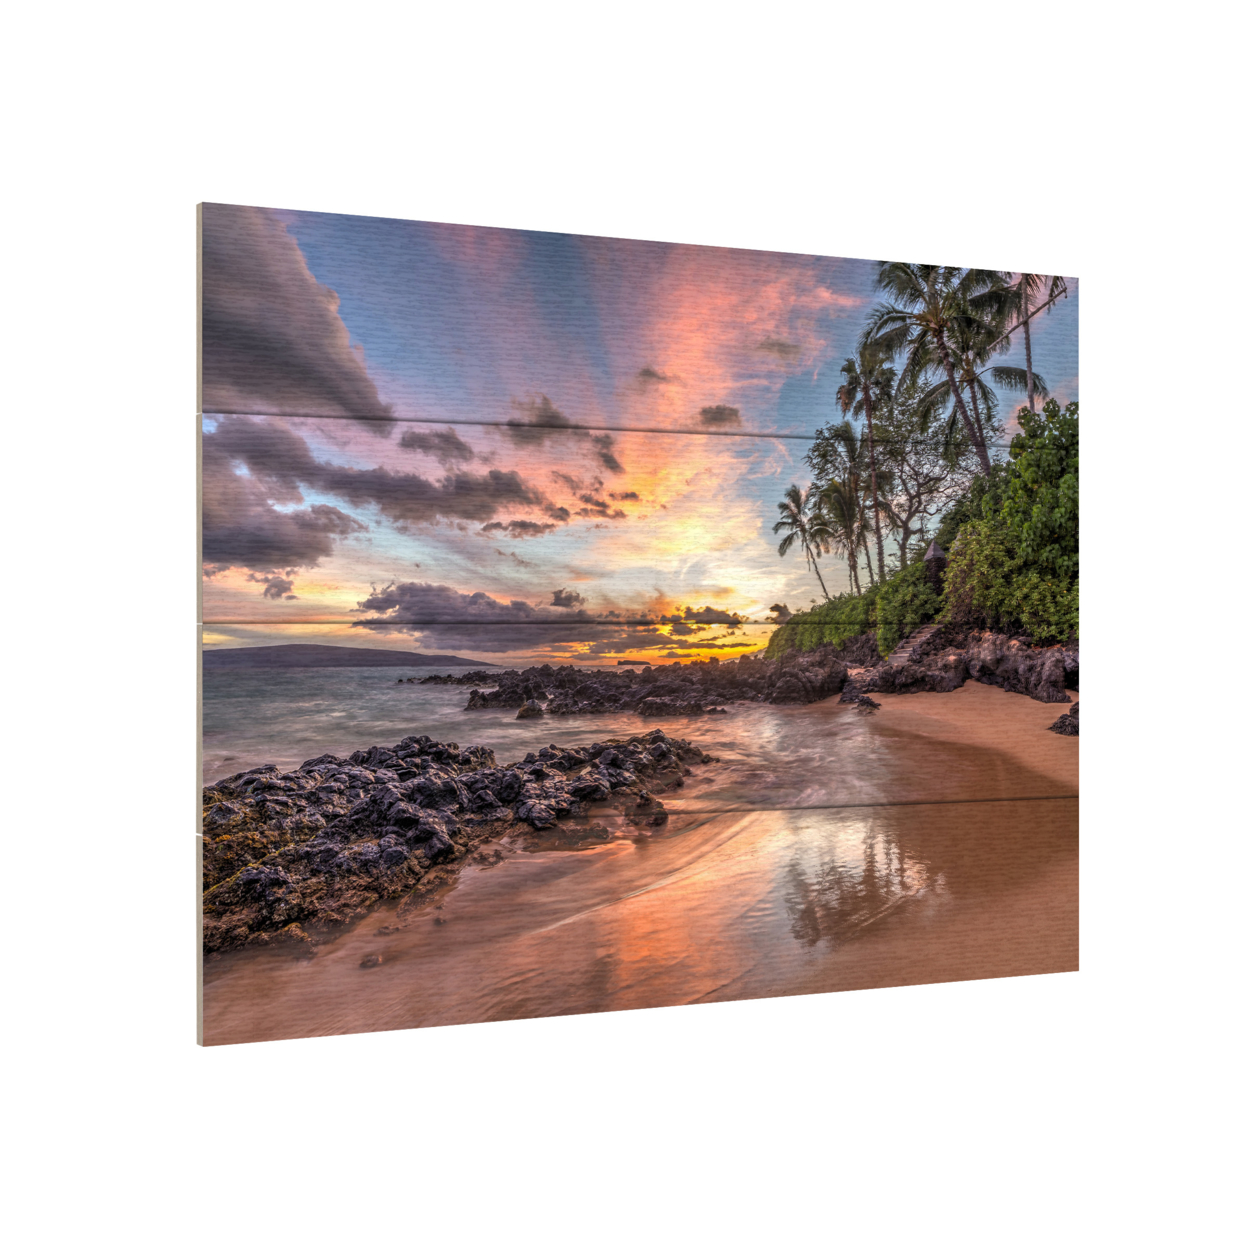 Wall Art 12 X 16 Inches Titled Hawaiian Sunset Wonder Ready To Hang Printed On Wooden Planks